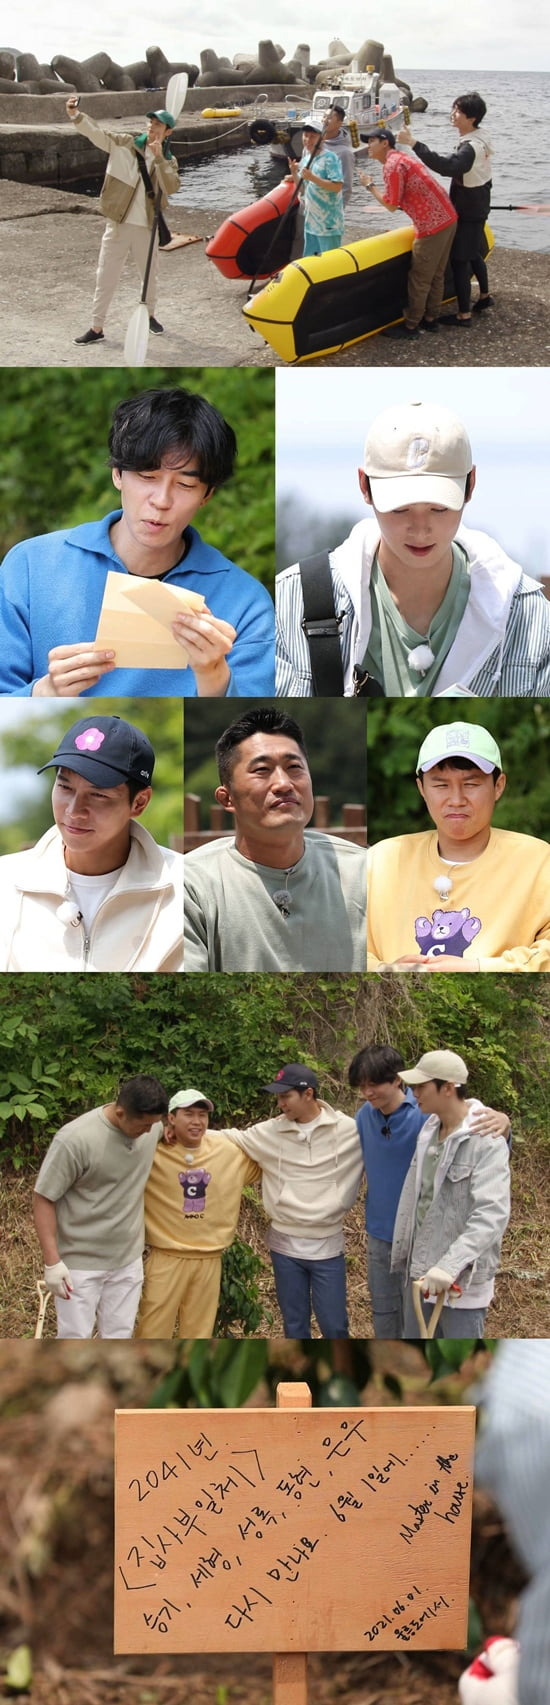 Cha Eun-woo and Shin Sung-rok will be confessing their minds ahead of SBS All The Butlers getting off.On the 20th, All The Butlers will feature a memorable trip of the last five members with Cha Eun-woo and Shin Sung-rok.In the recent recording, the last trip of five men saying goodbye to Ulleungdo, who met Master Lee Jang-hee, was held.The members took memories of the self-portraits in various places of Ulleungdo, took away the opponents oars while watching the scenery while taking a kayak, and raised them.The members who had friendship for nearly two years had time to talk about their hearts.The members who realized that it was the last trip did not easily speak at first, but then they conveyed their sincerity to each other through honest stories.In particular, Shin Sung-rok and Cha Eun-woo told their members that they would not feel real and I will be a younger brother who can not be seen.This is the back door that made everyones eyes red in the scene.In addition, Cha Eun-woo prepared a time capsule to commemorate his last trip with his brothers; so the members buried the time capsule in Ulleungdo, promising to meet again in 2041.What are the precious memories of the members in the time capsule?Meanwhile, All The Butlers will be broadcast at 6:25 pm on the 20th.